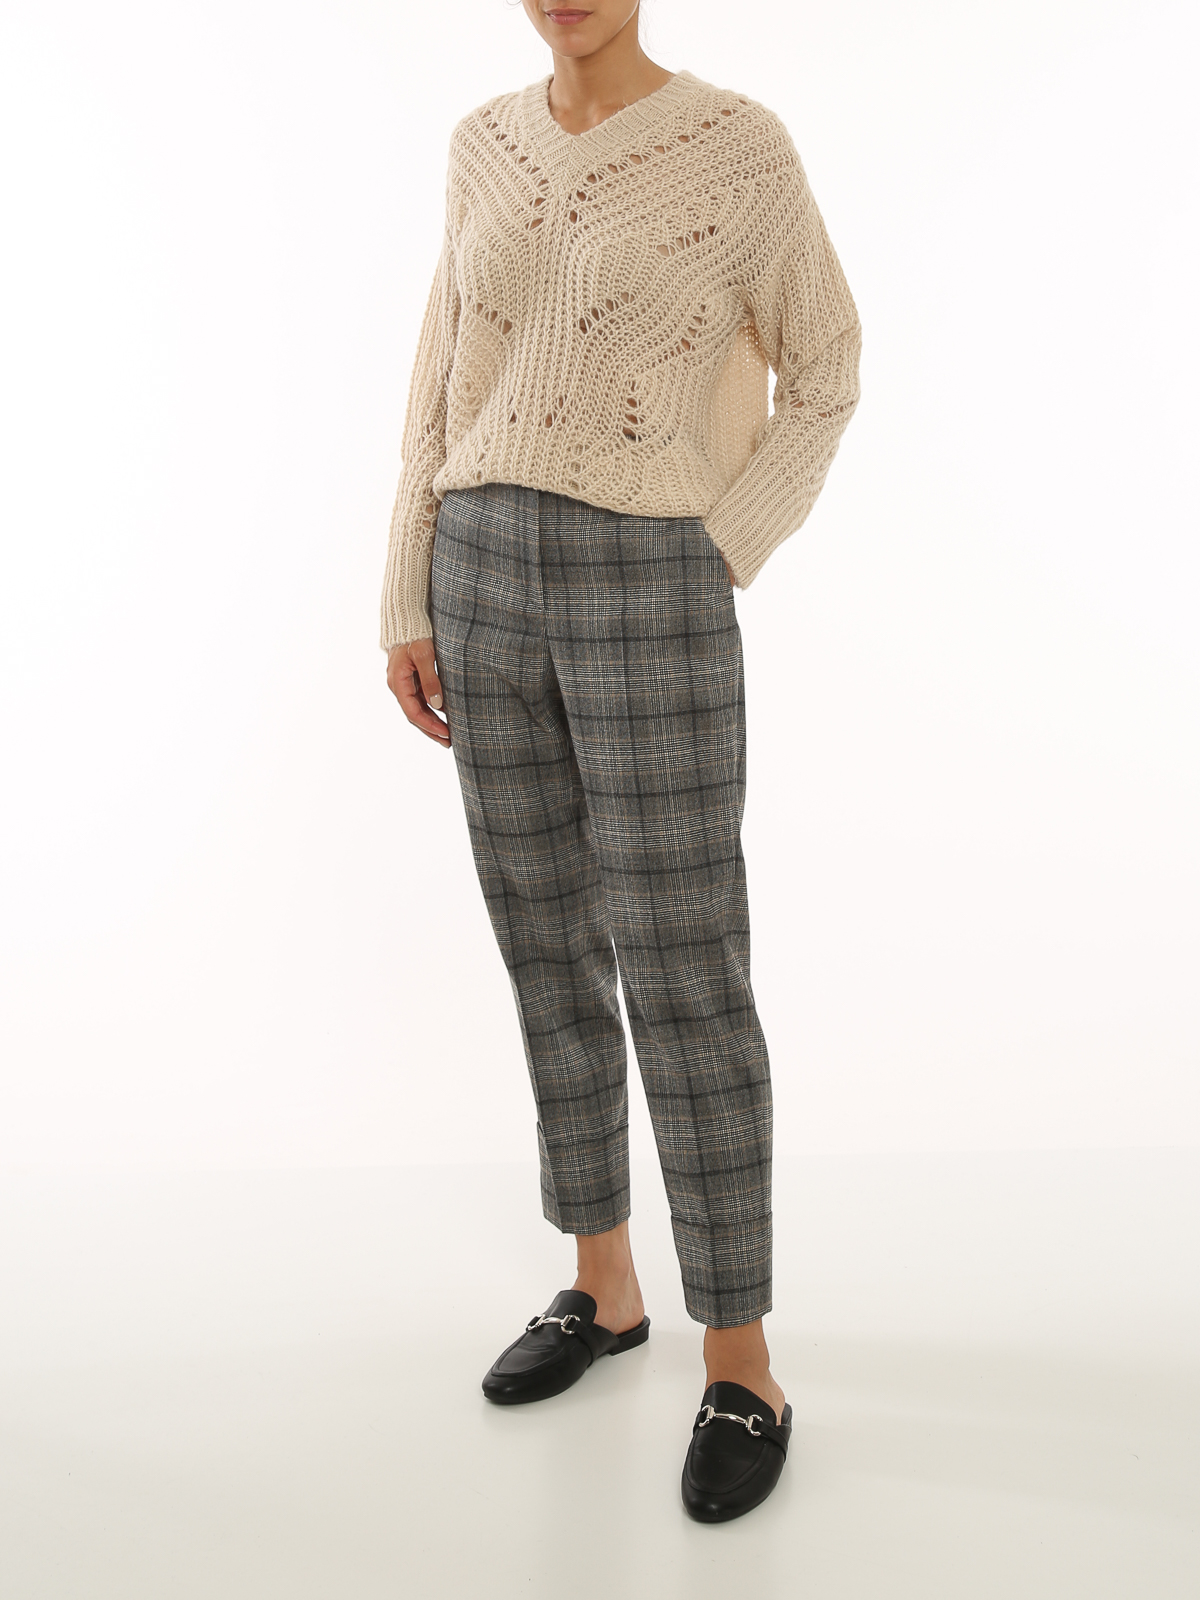 Thom Browne tartan cropped trousers price in Doha Qatar | Compare Prices